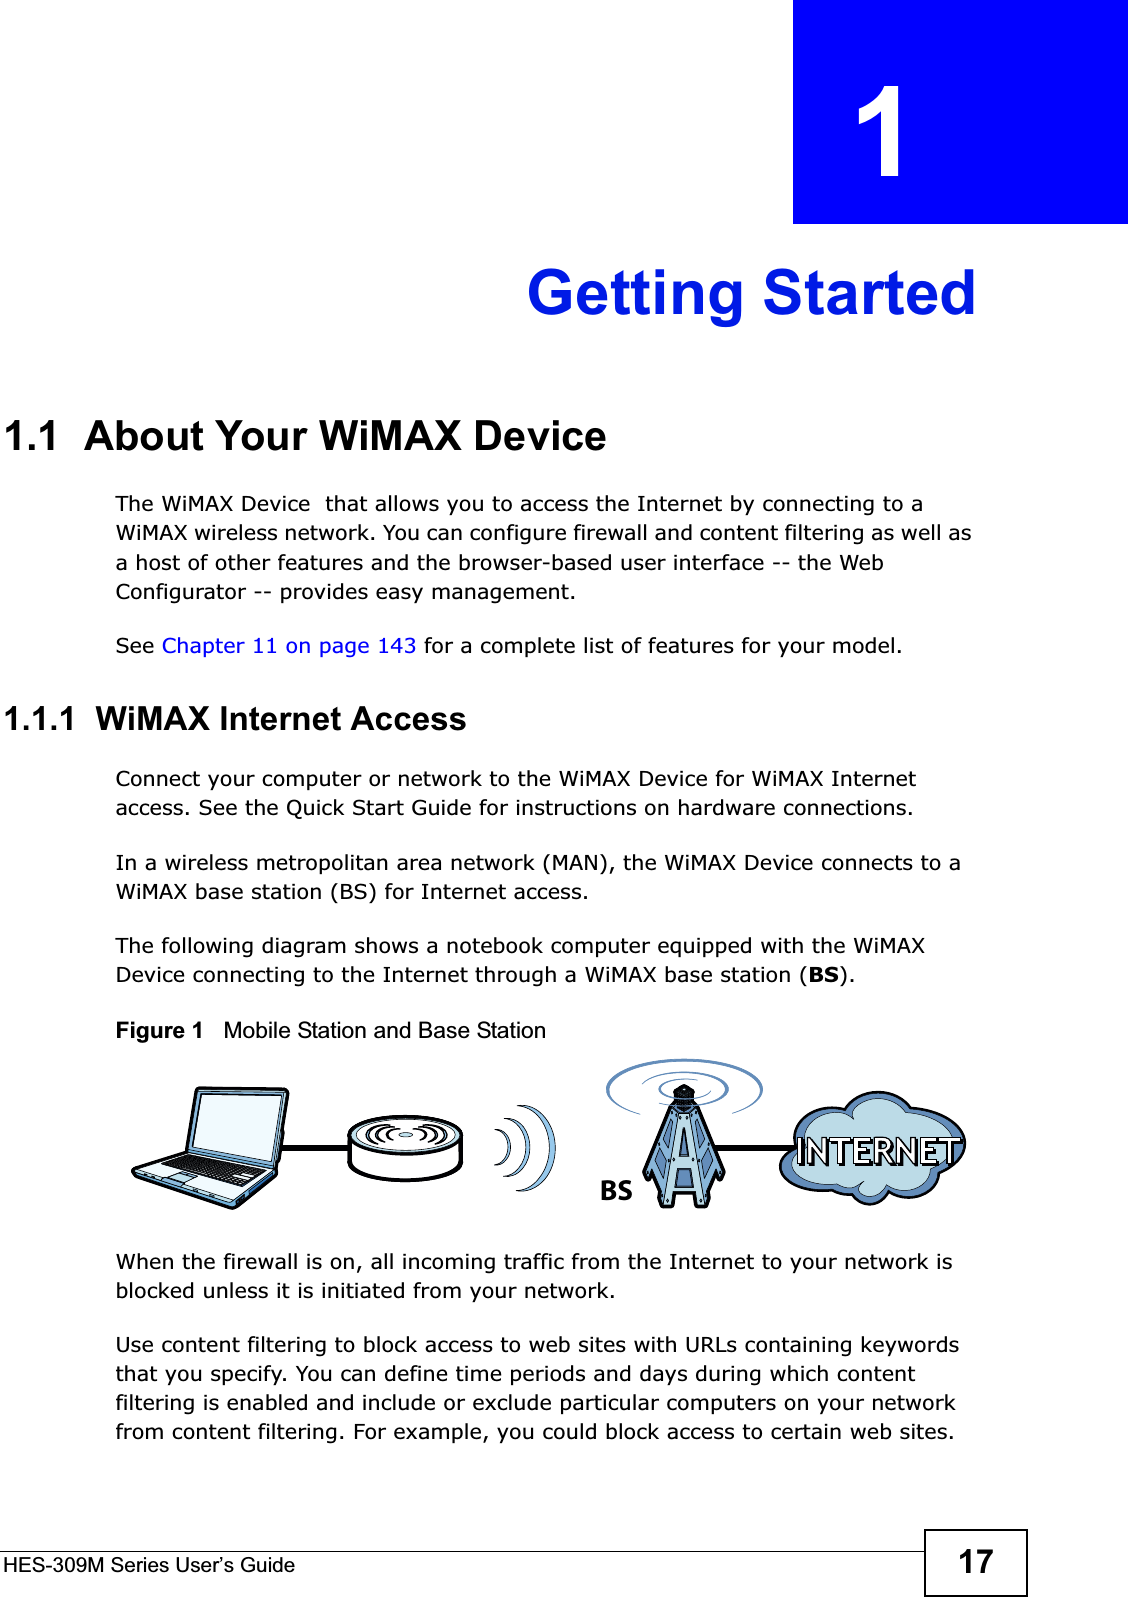 HES-309M Series User’s Guide 17CHAPTER  1 Getting Started1.1  About Your WiMAX Device The WiMAX Device  that allows you to access the Internet by connecting to a WiMAX wireless network. You can configure firewall and content filtering as well as a host of other features and the browser-based user interface -- the Web Configurator -- provides easy management.See Chapter 11 on page 143 for a complete list of features for your model.1.1.1  WiMAX Internet AccessConnect your computer or network to the WiMAX Device for WiMAX Internet access. See the Quick Start Guide for instructions on hardware connections.In a wireless metropolitan area network (MAN), the WiMAX Device connects to a WiMAX base station (BS) for Internet access. The following diagram shows a notebook computer equipped with the WiMAX Device connecting to the Internet through a WiMAX base station (BS).Figure 1   Mobile Station and Base StationWhen the firewall is on, all incoming traffic from the Internet to your network is blocked unless it is initiated from your network. Use content filtering to block access to web sites with URLs containing keywords that you specify. You can define time periods and days during which content filtering is enabled and include or exclude particular computers on your network from content filtering. For example, you could block access to certain web sites.BS